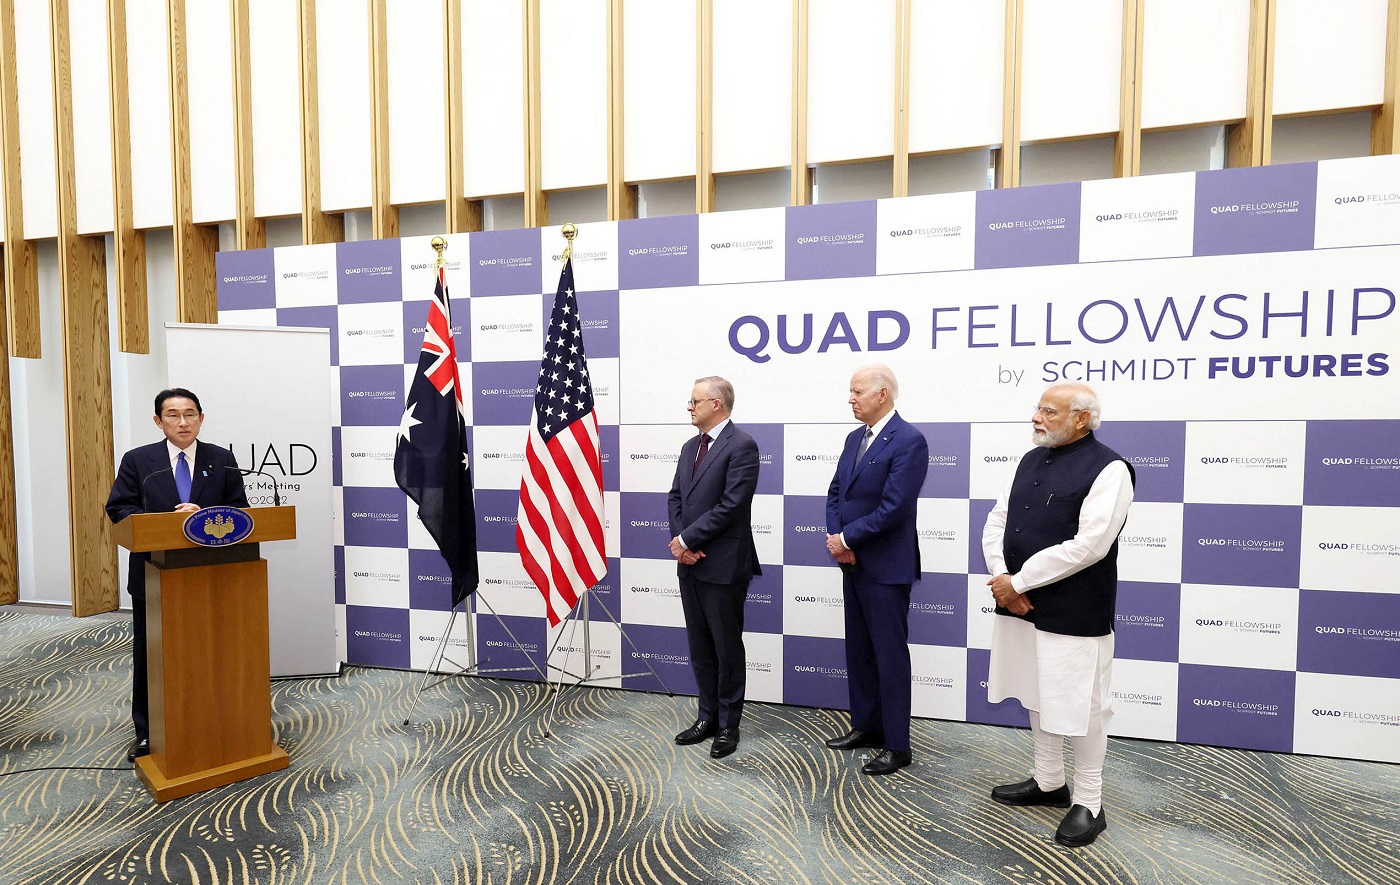 Photograph of an event to celebrate the establishment of the Quad Fellowship (1)